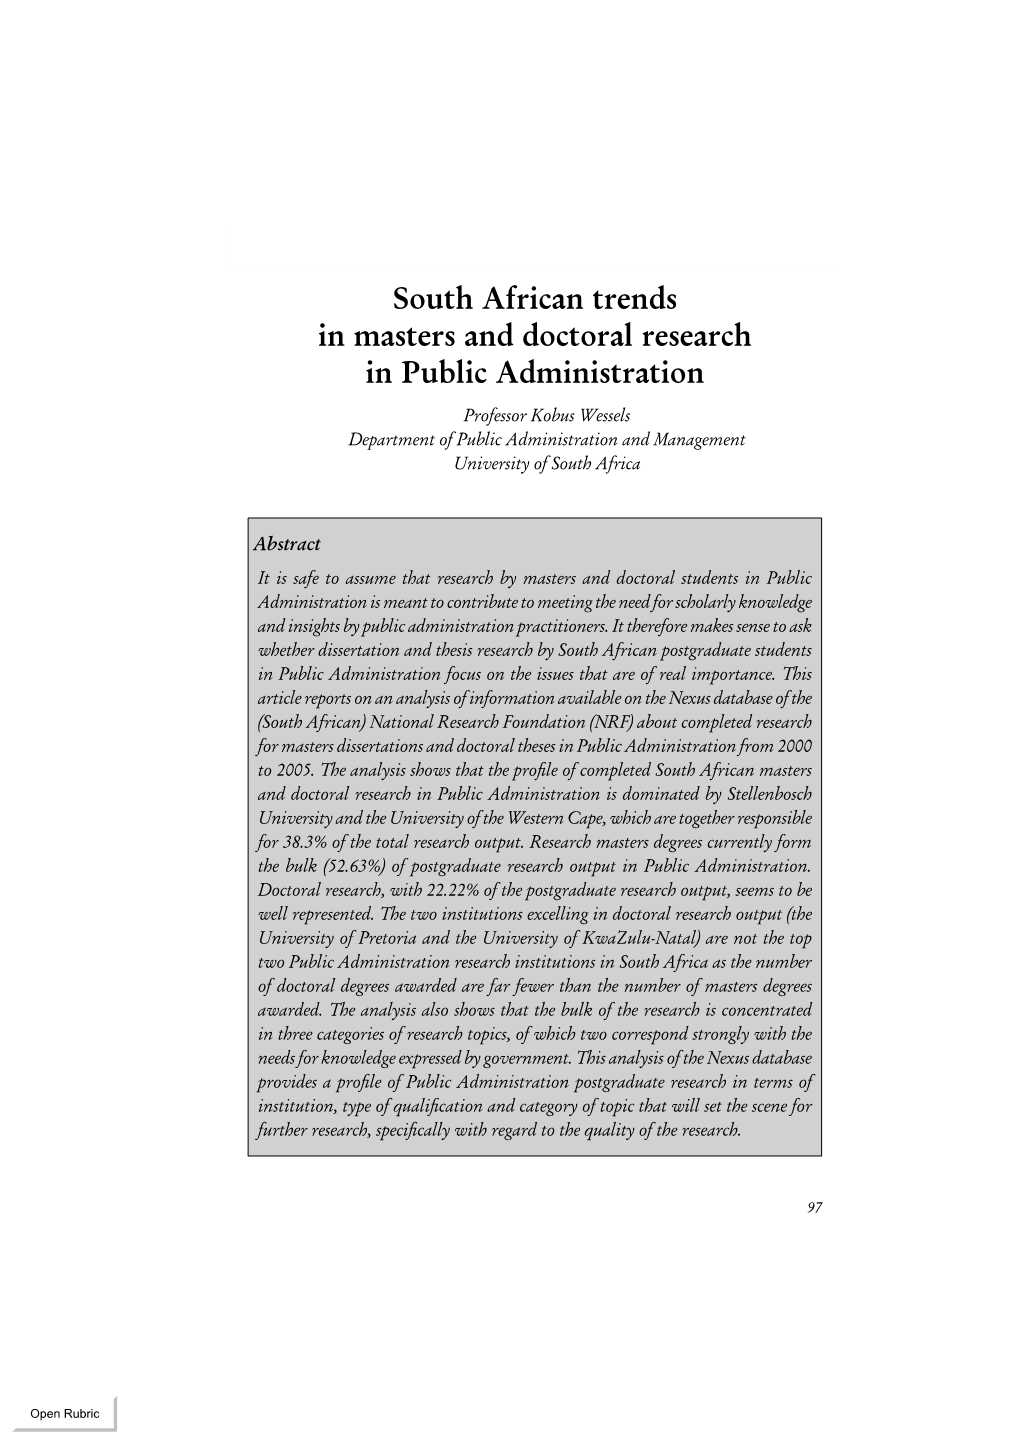 South African Trends in Masters and Doctoral Research in Public